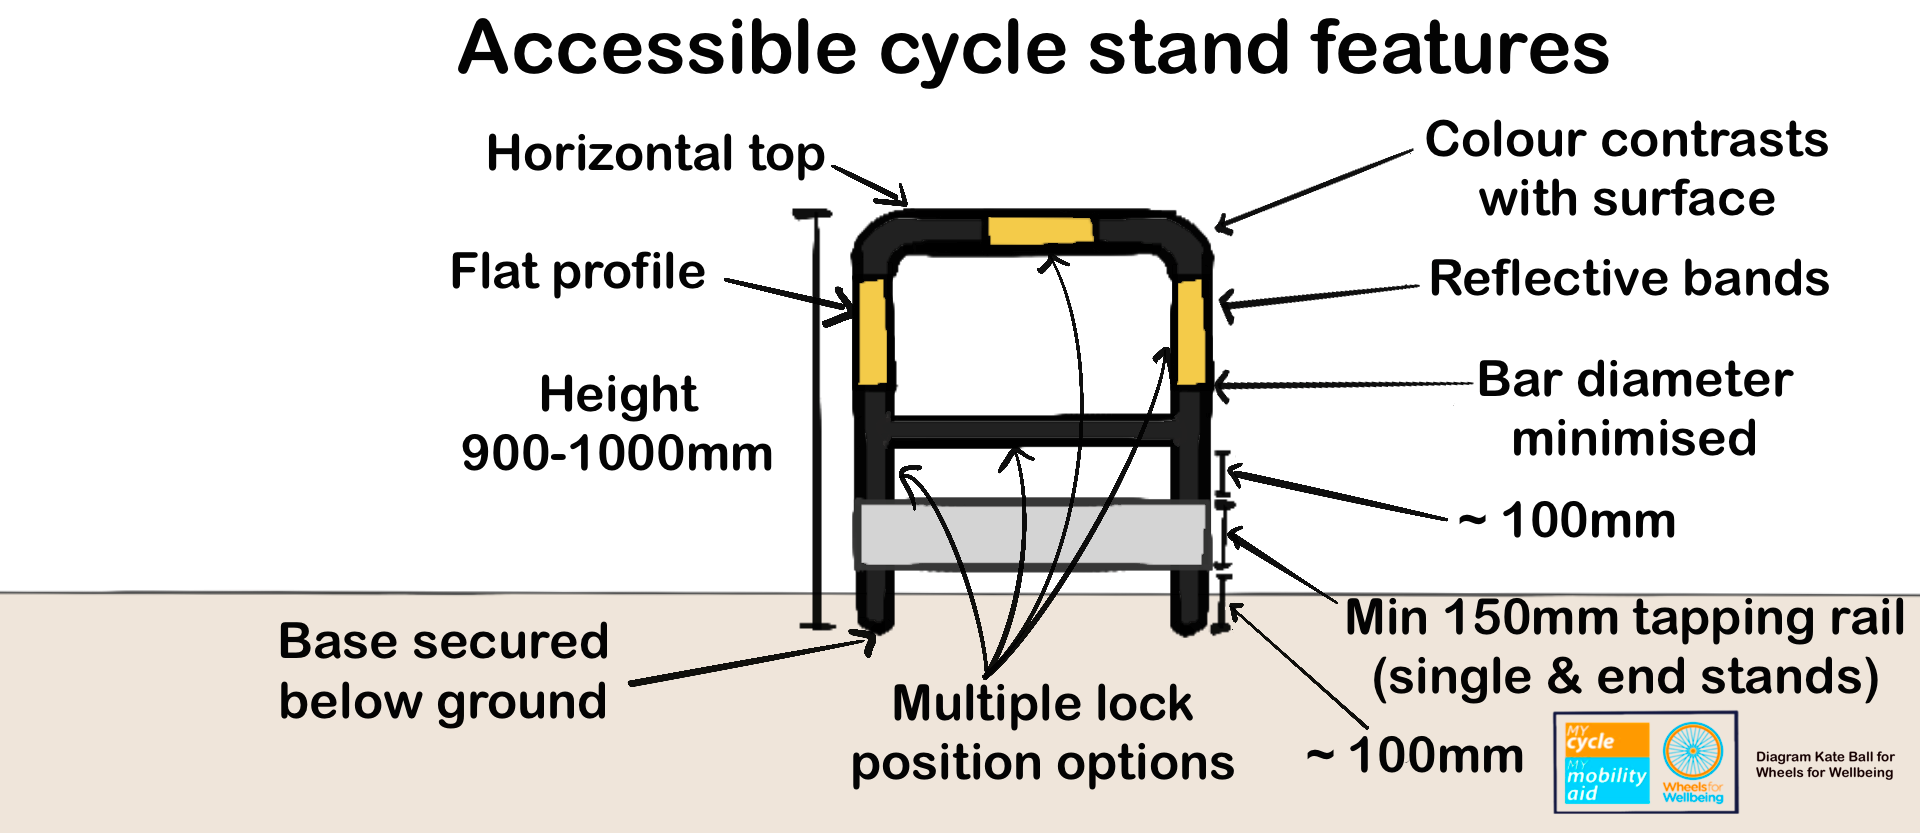 Graphic titled "accessible cycle stand features" shows drawing of a black mid-bar Sheffield stand with a tapping rail in concrete. Labels on the diagram are: Height 900-1000mm, base secured below ground, flat profile, horizontal top, colour contrasts with surface, reflective bands, bar diameter minimised, multiple lock position options, ~100mm ground to tapping rail, min 150mm tapping rail (single and end stands), ~100mm tapping rail to mid-bar on stand. The Wheels for Wellbeing logo and My Cycle My Mobility Aid logo are in the bottom right corner with text which reads "diagram Kate Ball for Wheels for Wellbeing".